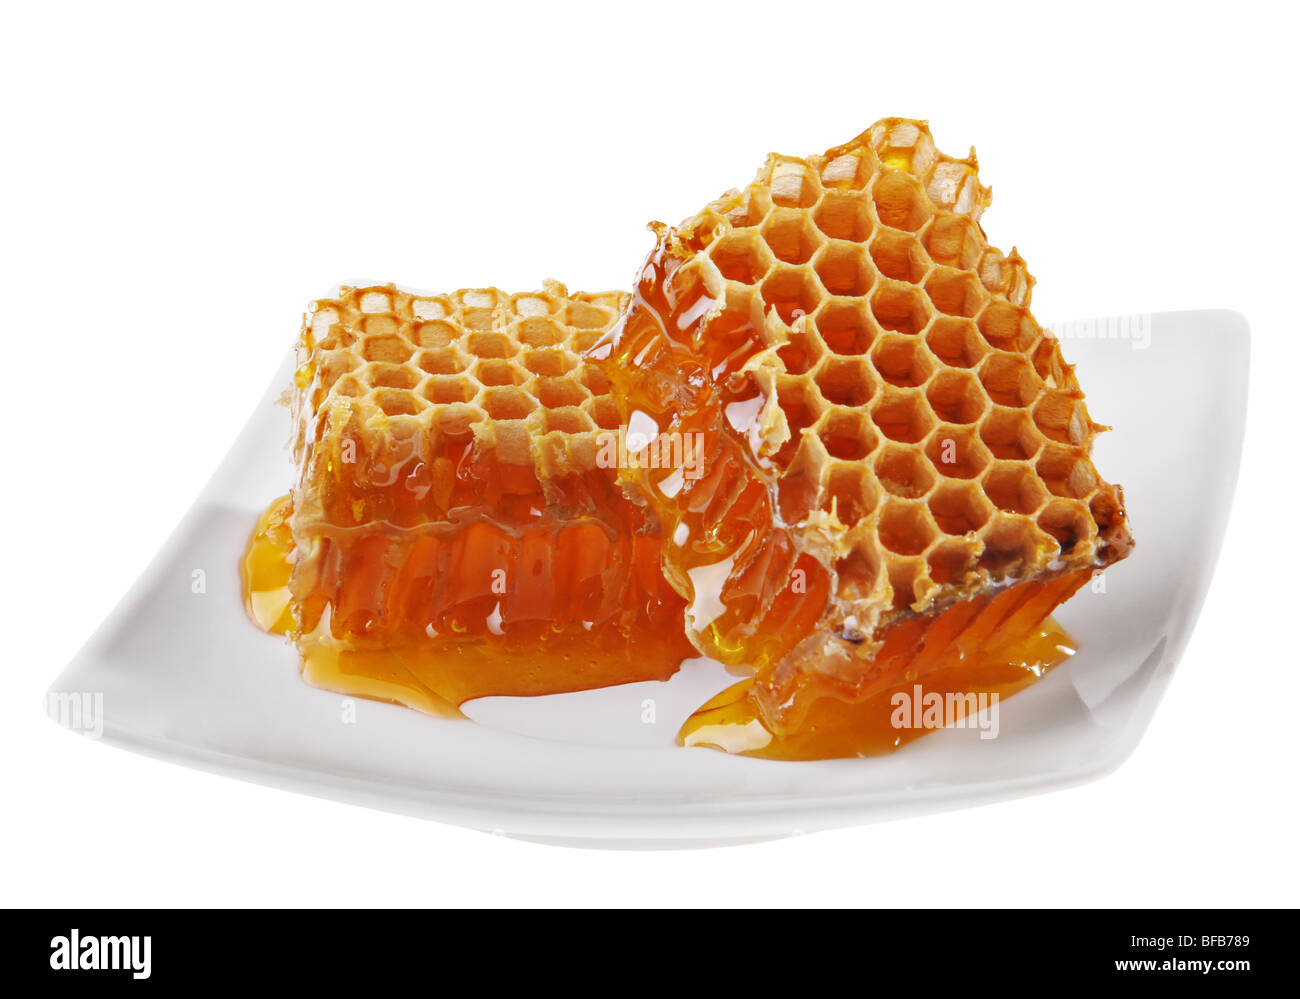 Yellow honeycomb wax cell detail slice on white plate Stock Photo